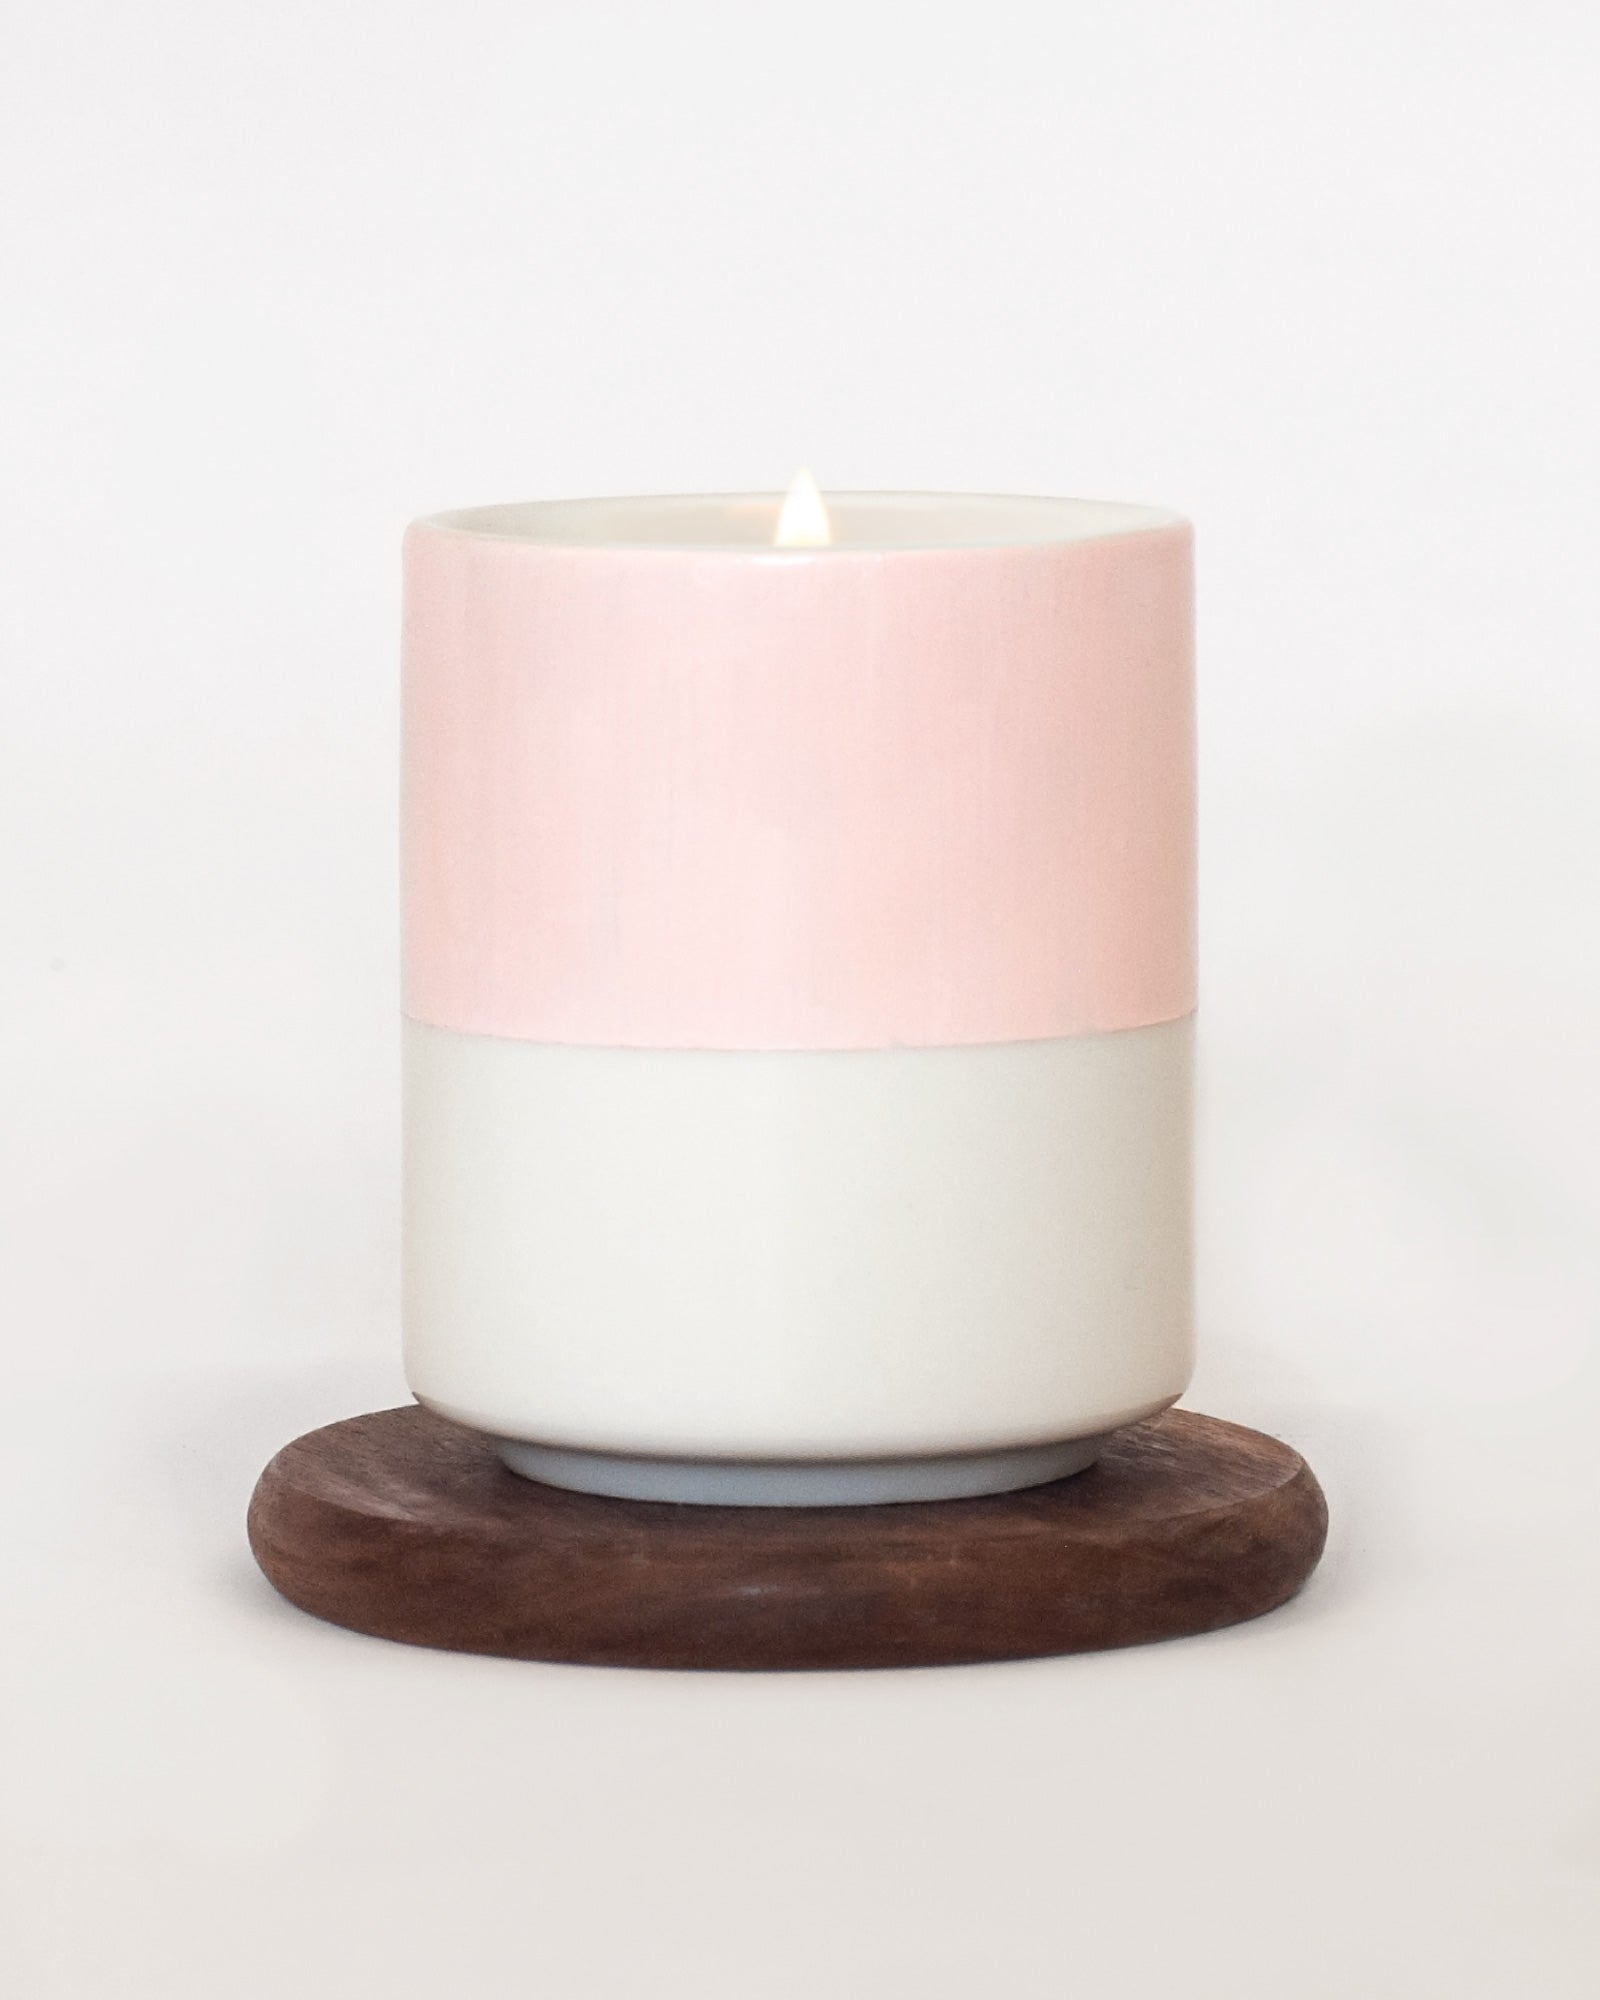 Hand Painted Porcelain Small Planter with Pure Soy Candle - Blush Pink Colour Block